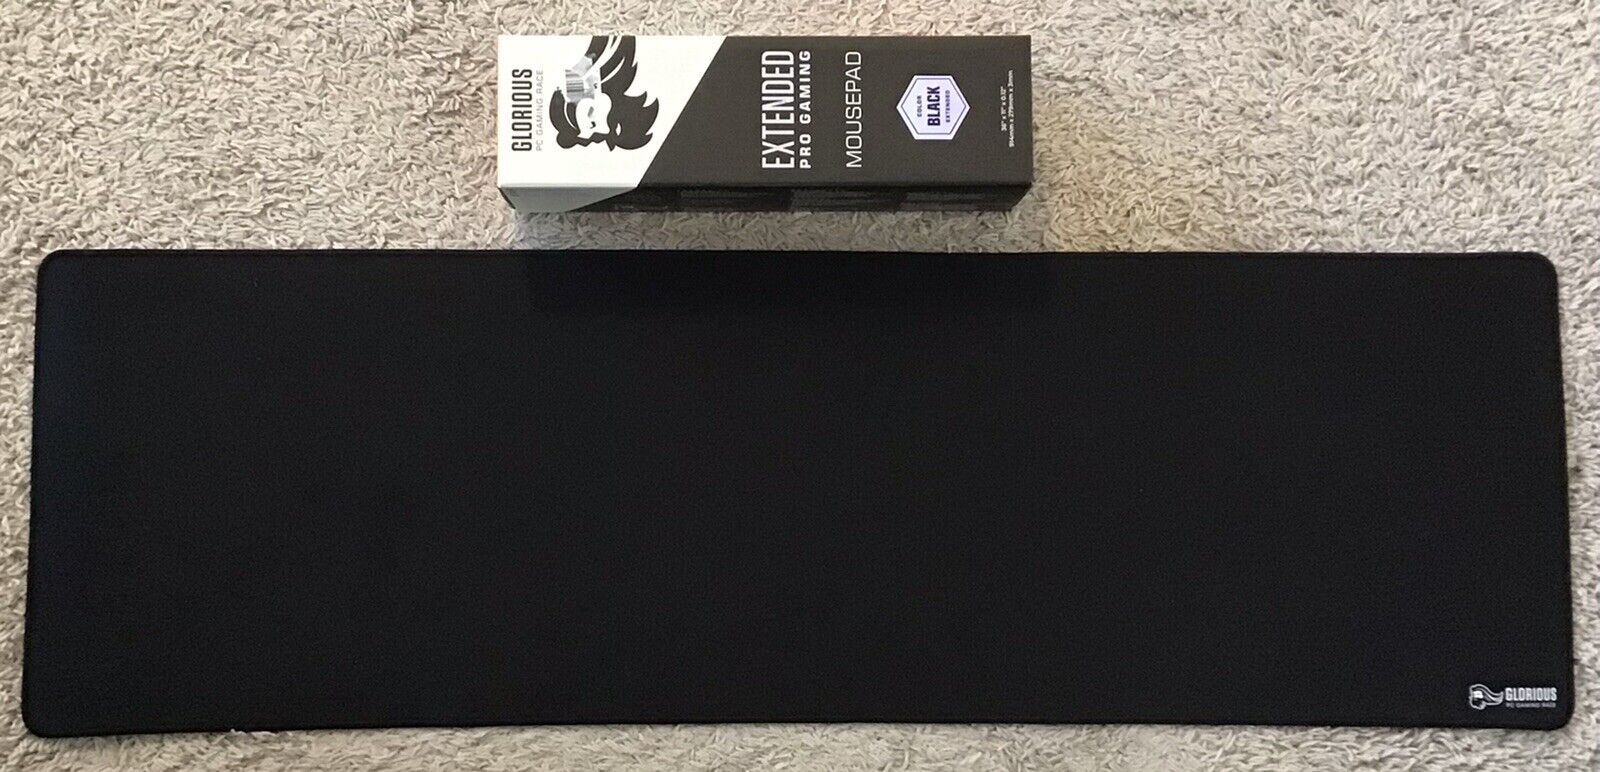 Glorious Extended Gaming Mouse Pad/Mat - Long Black Cloth Pro Gaming Mousepad